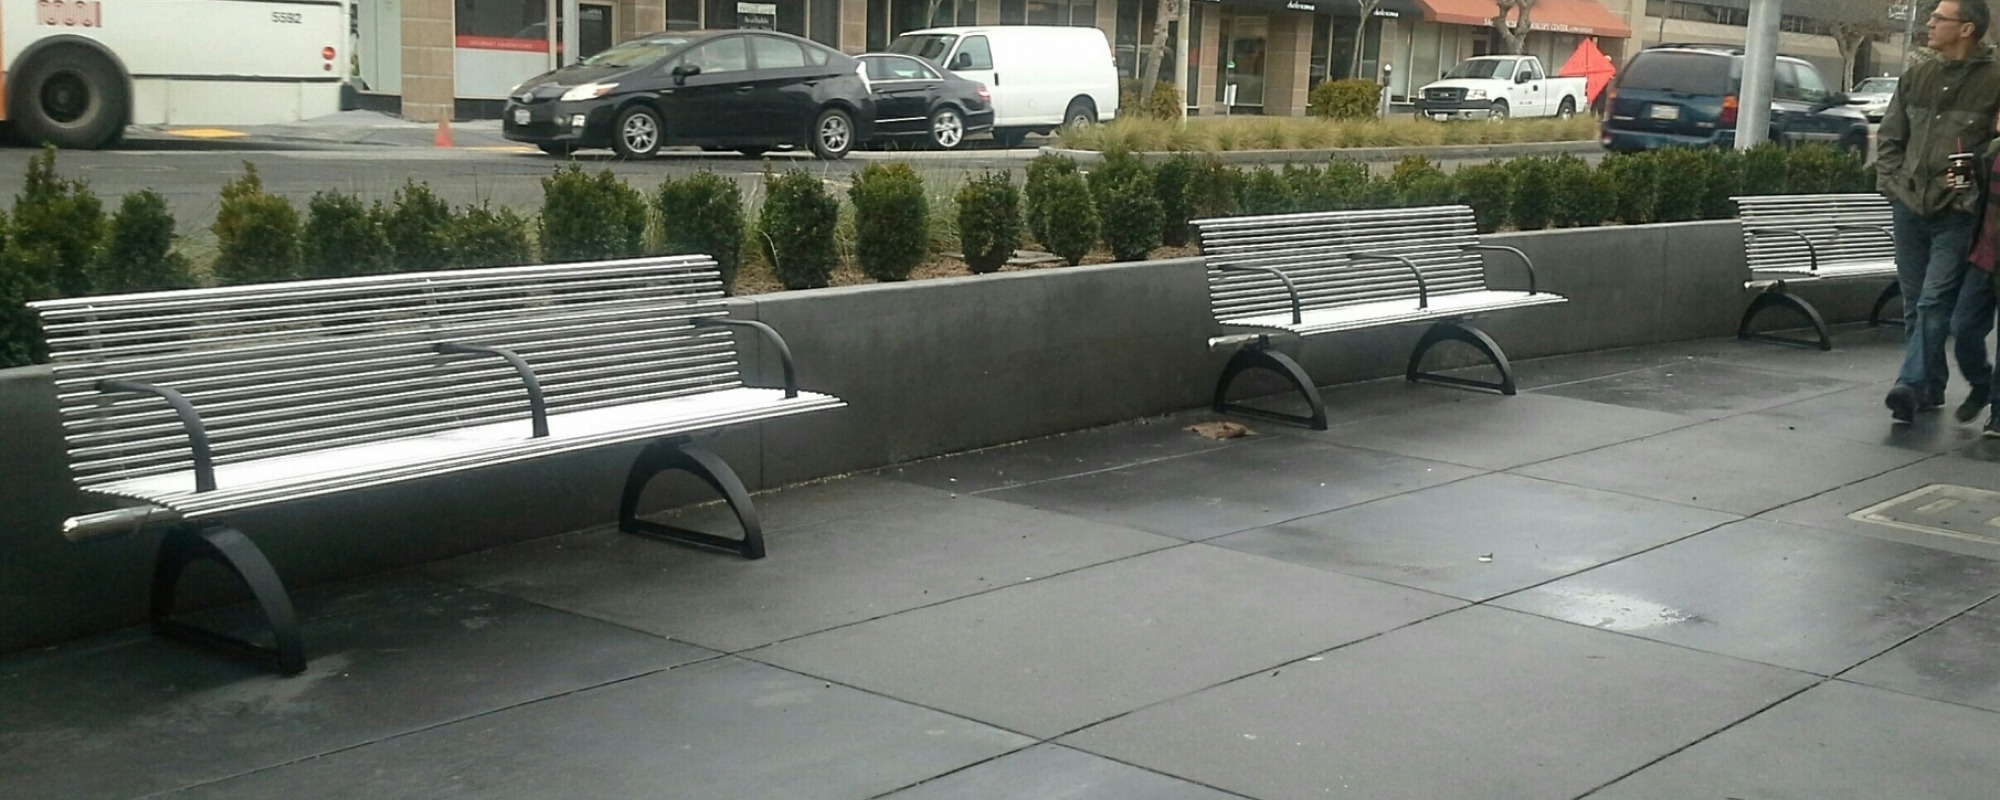 benches